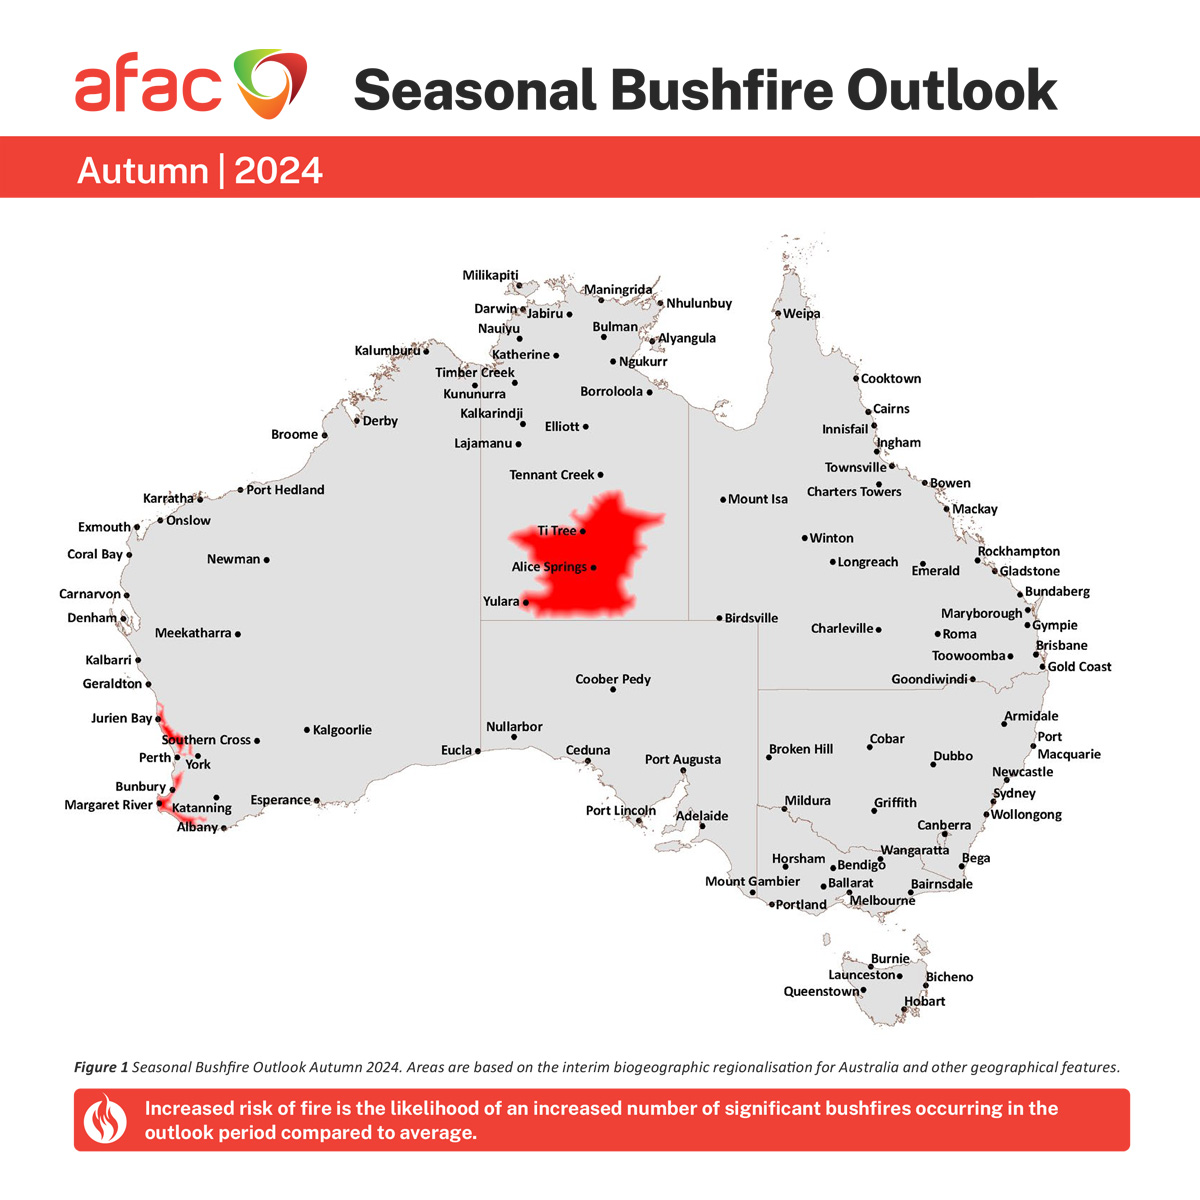 AFAC, the National Council for fire and emergency services, has released the Seasonal Bushfire Outlook for Autumn 2024. This autumn, an increased risk of fire is identified for locations in WA and the NT. See the full #BushfireOutlook for Autumn 2024: afac.com.au/auxiliary/publ…